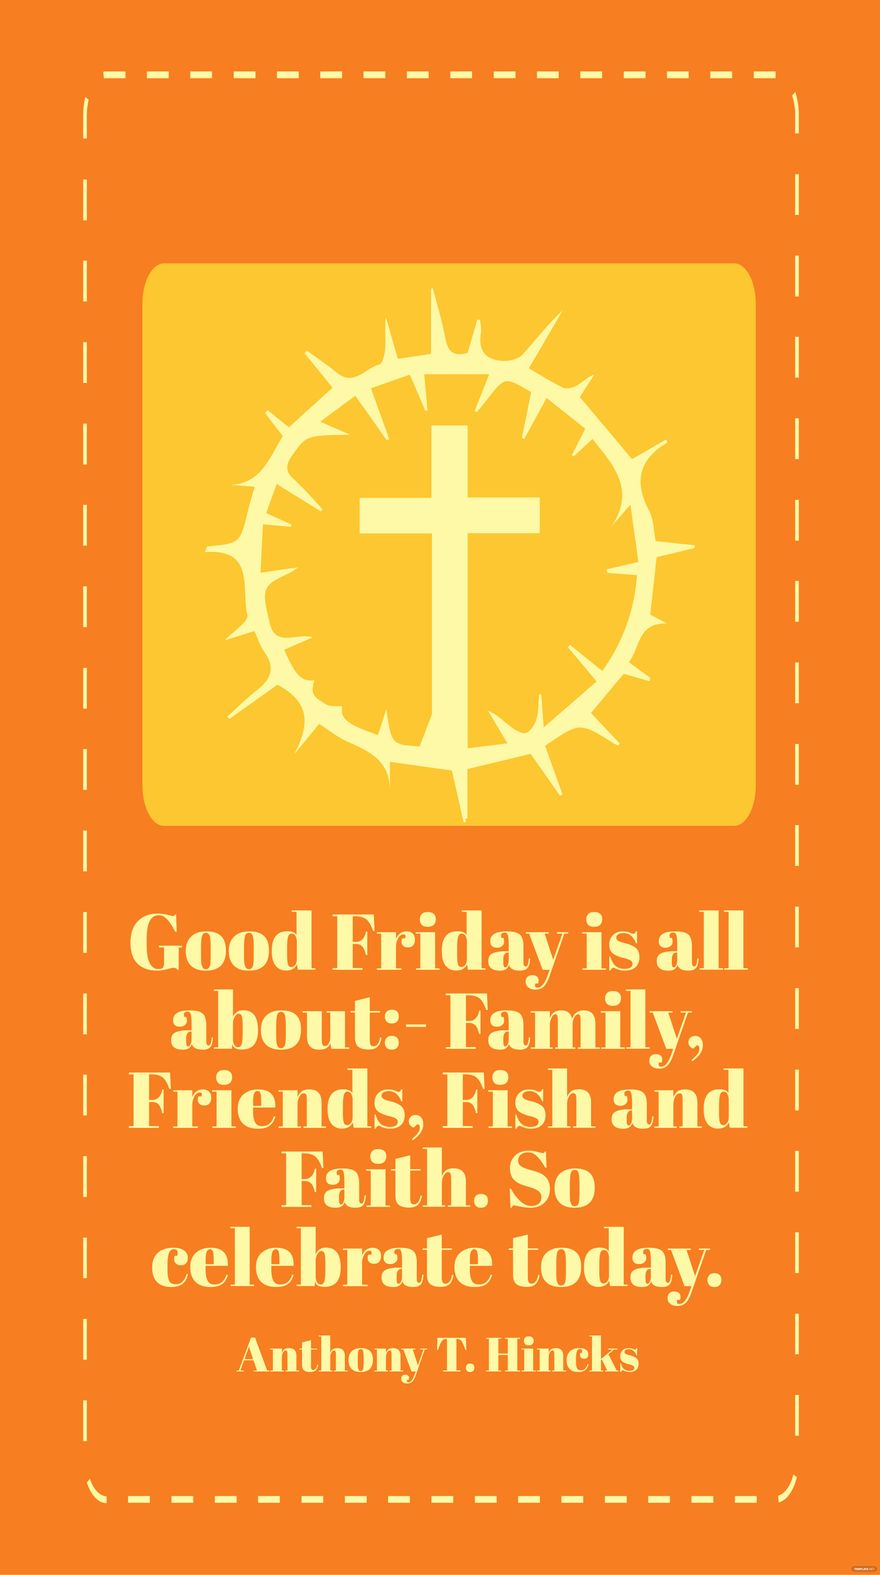 Free Anthony T. Hincks - Good Friday is all about:- Family, Friends, Fish and Faith. So celebrate today.